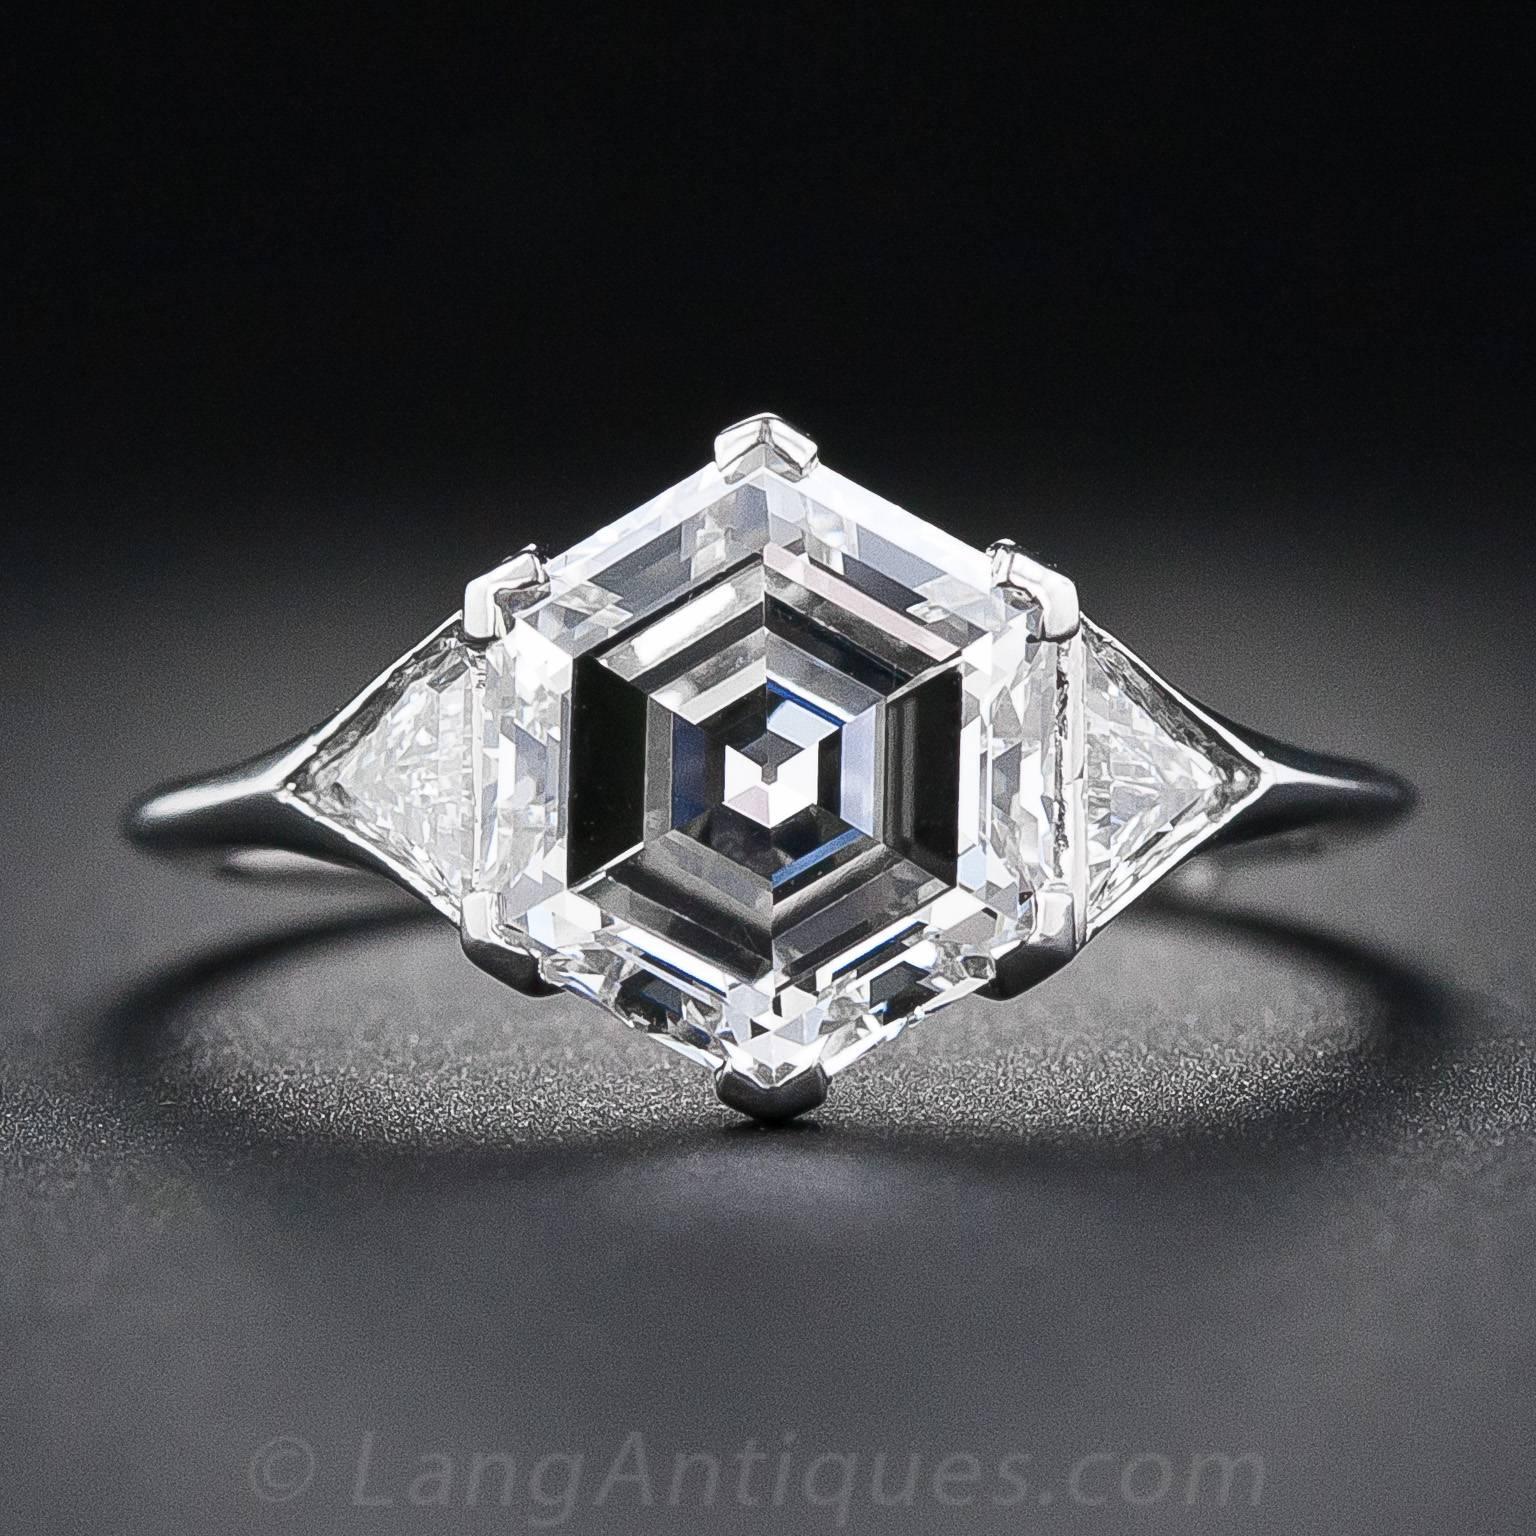 A uniquely beautiful Art Deco diamond engagement ring featuring an entrancing and enchanting hexagonal-cut diamond weighing just nine points shy of three carats. This rare and radiant rock is set with chevron-shape prongs between a sparkling pair of